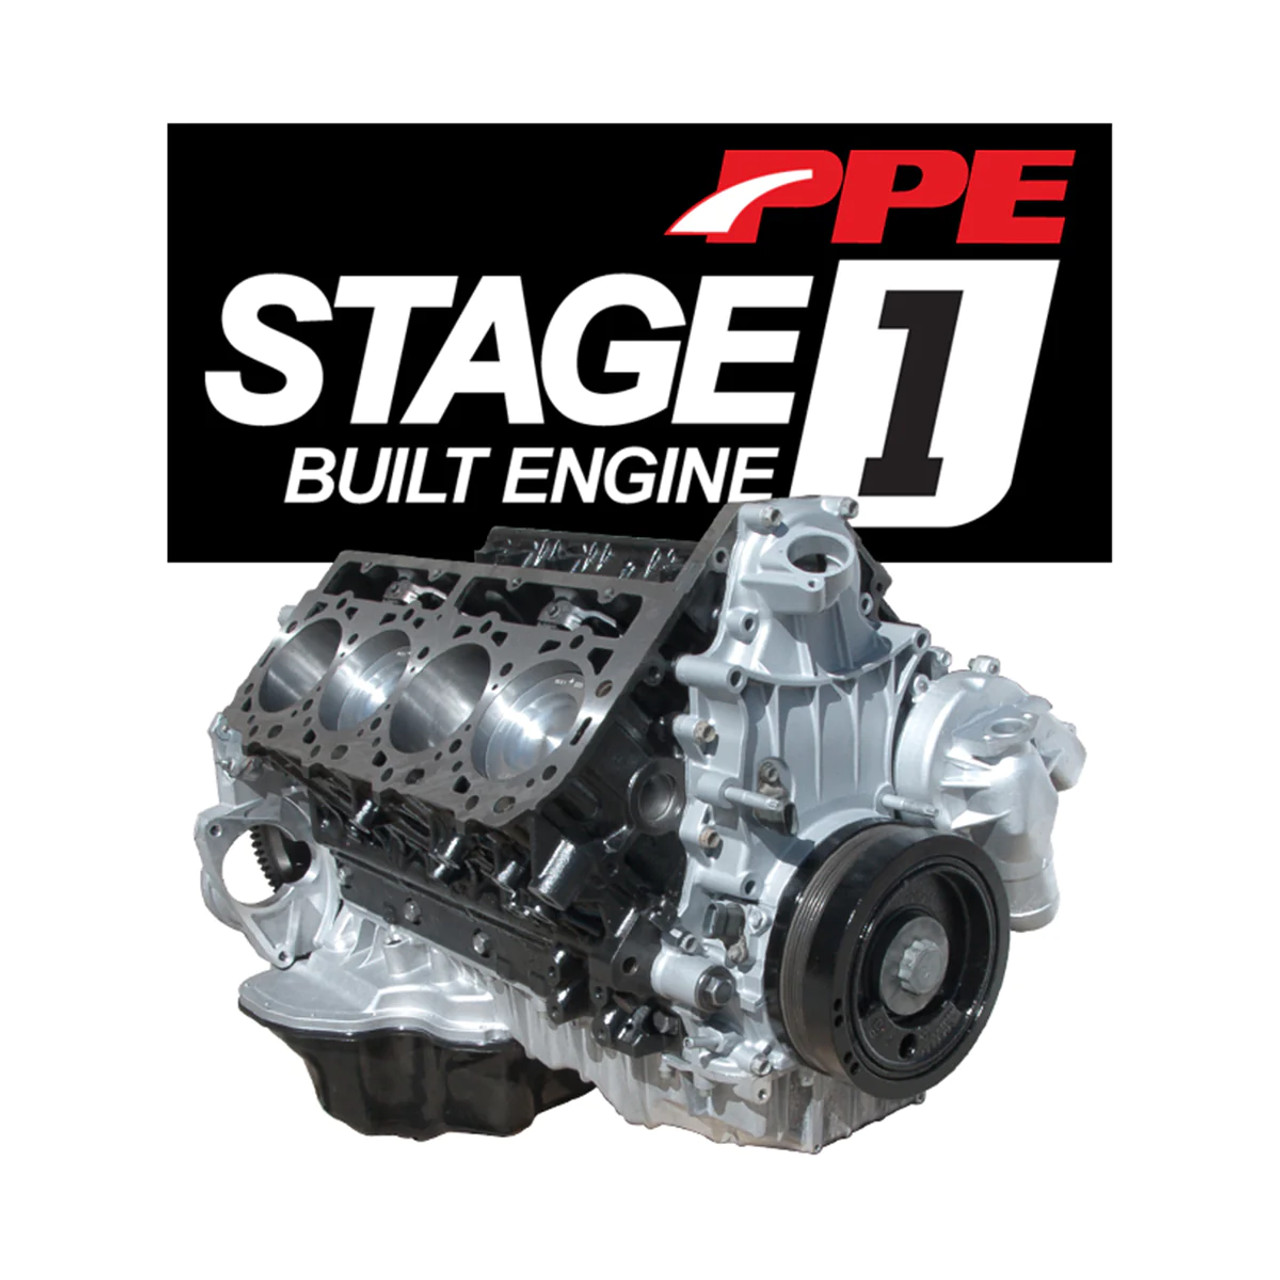 PPE Stage 1 Short Block CUSTOM BUILD for 2004.5 to 2005 6.6L Duramax (110101200)Main View